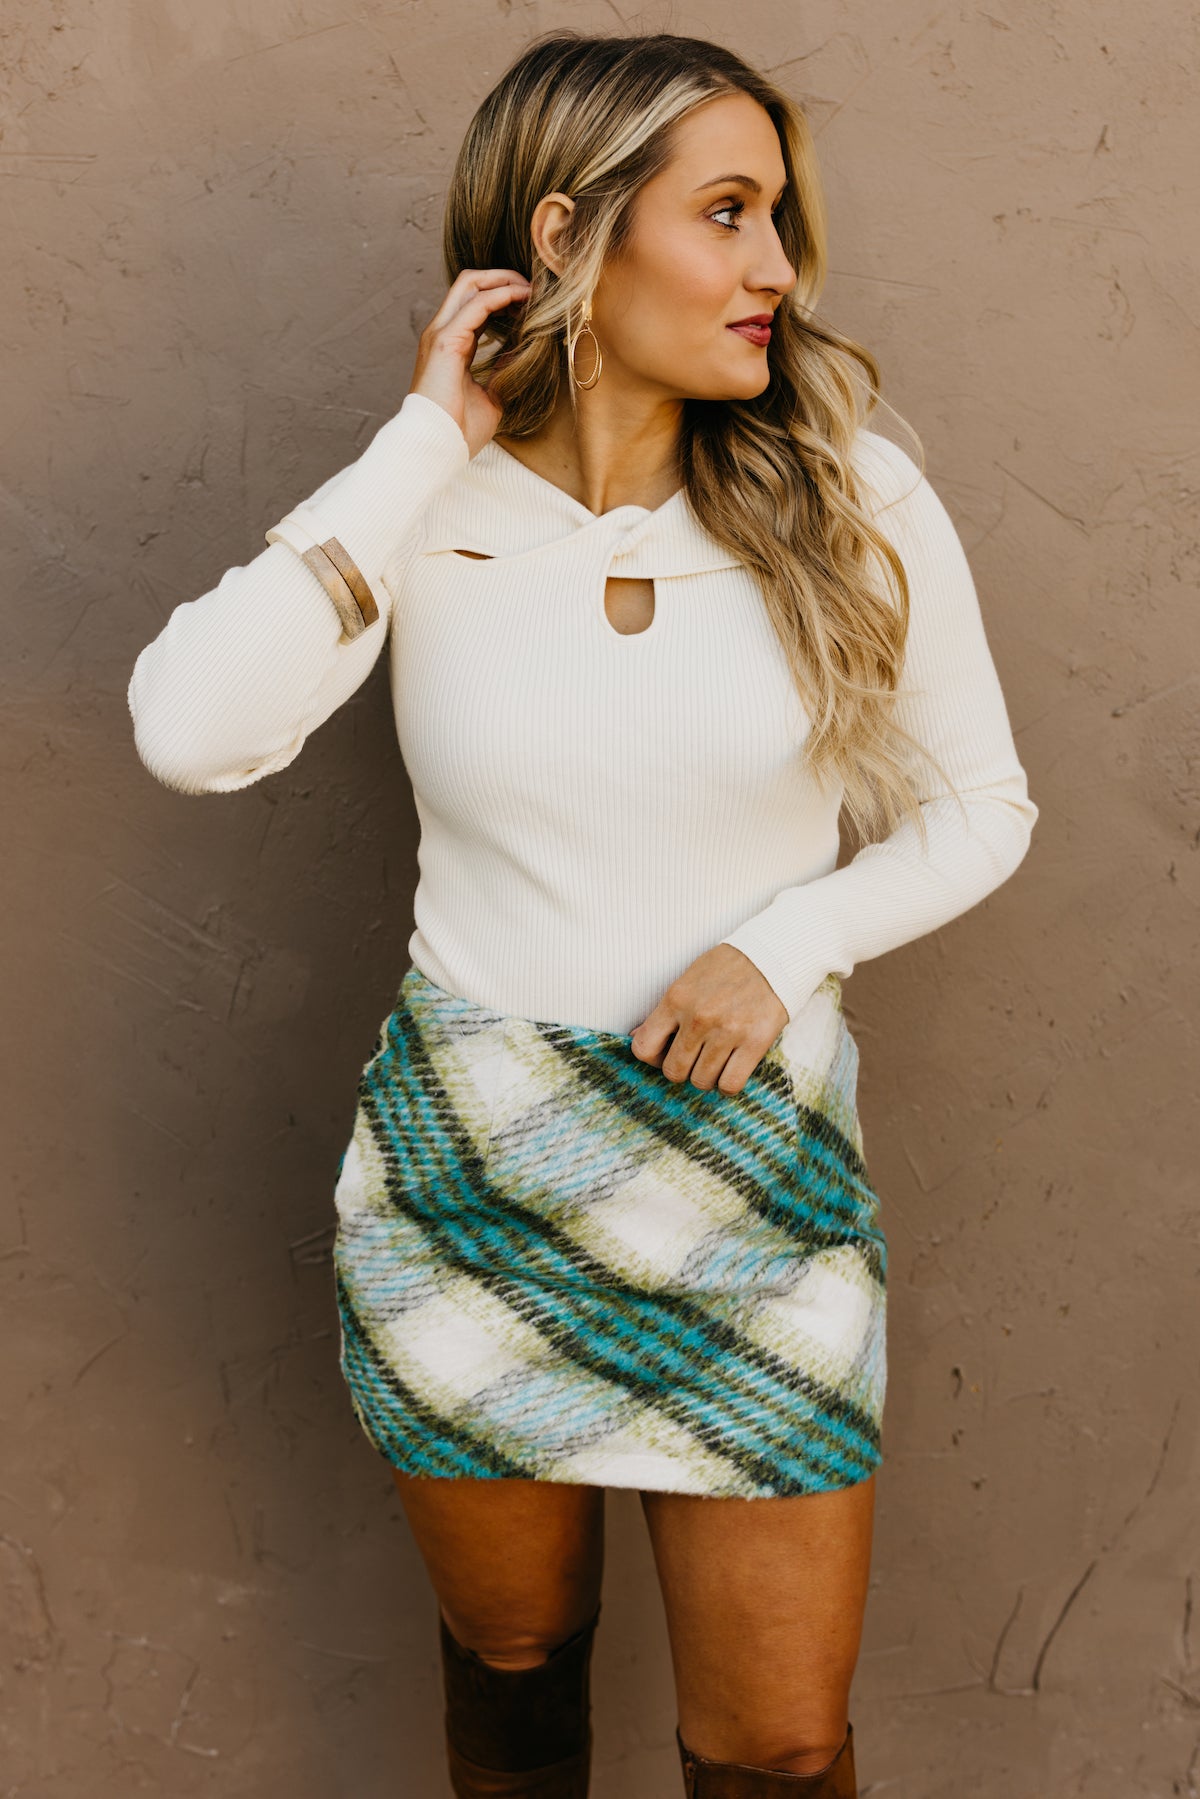 The Easton Twist Ribbed Sweater  - FINAL SALE